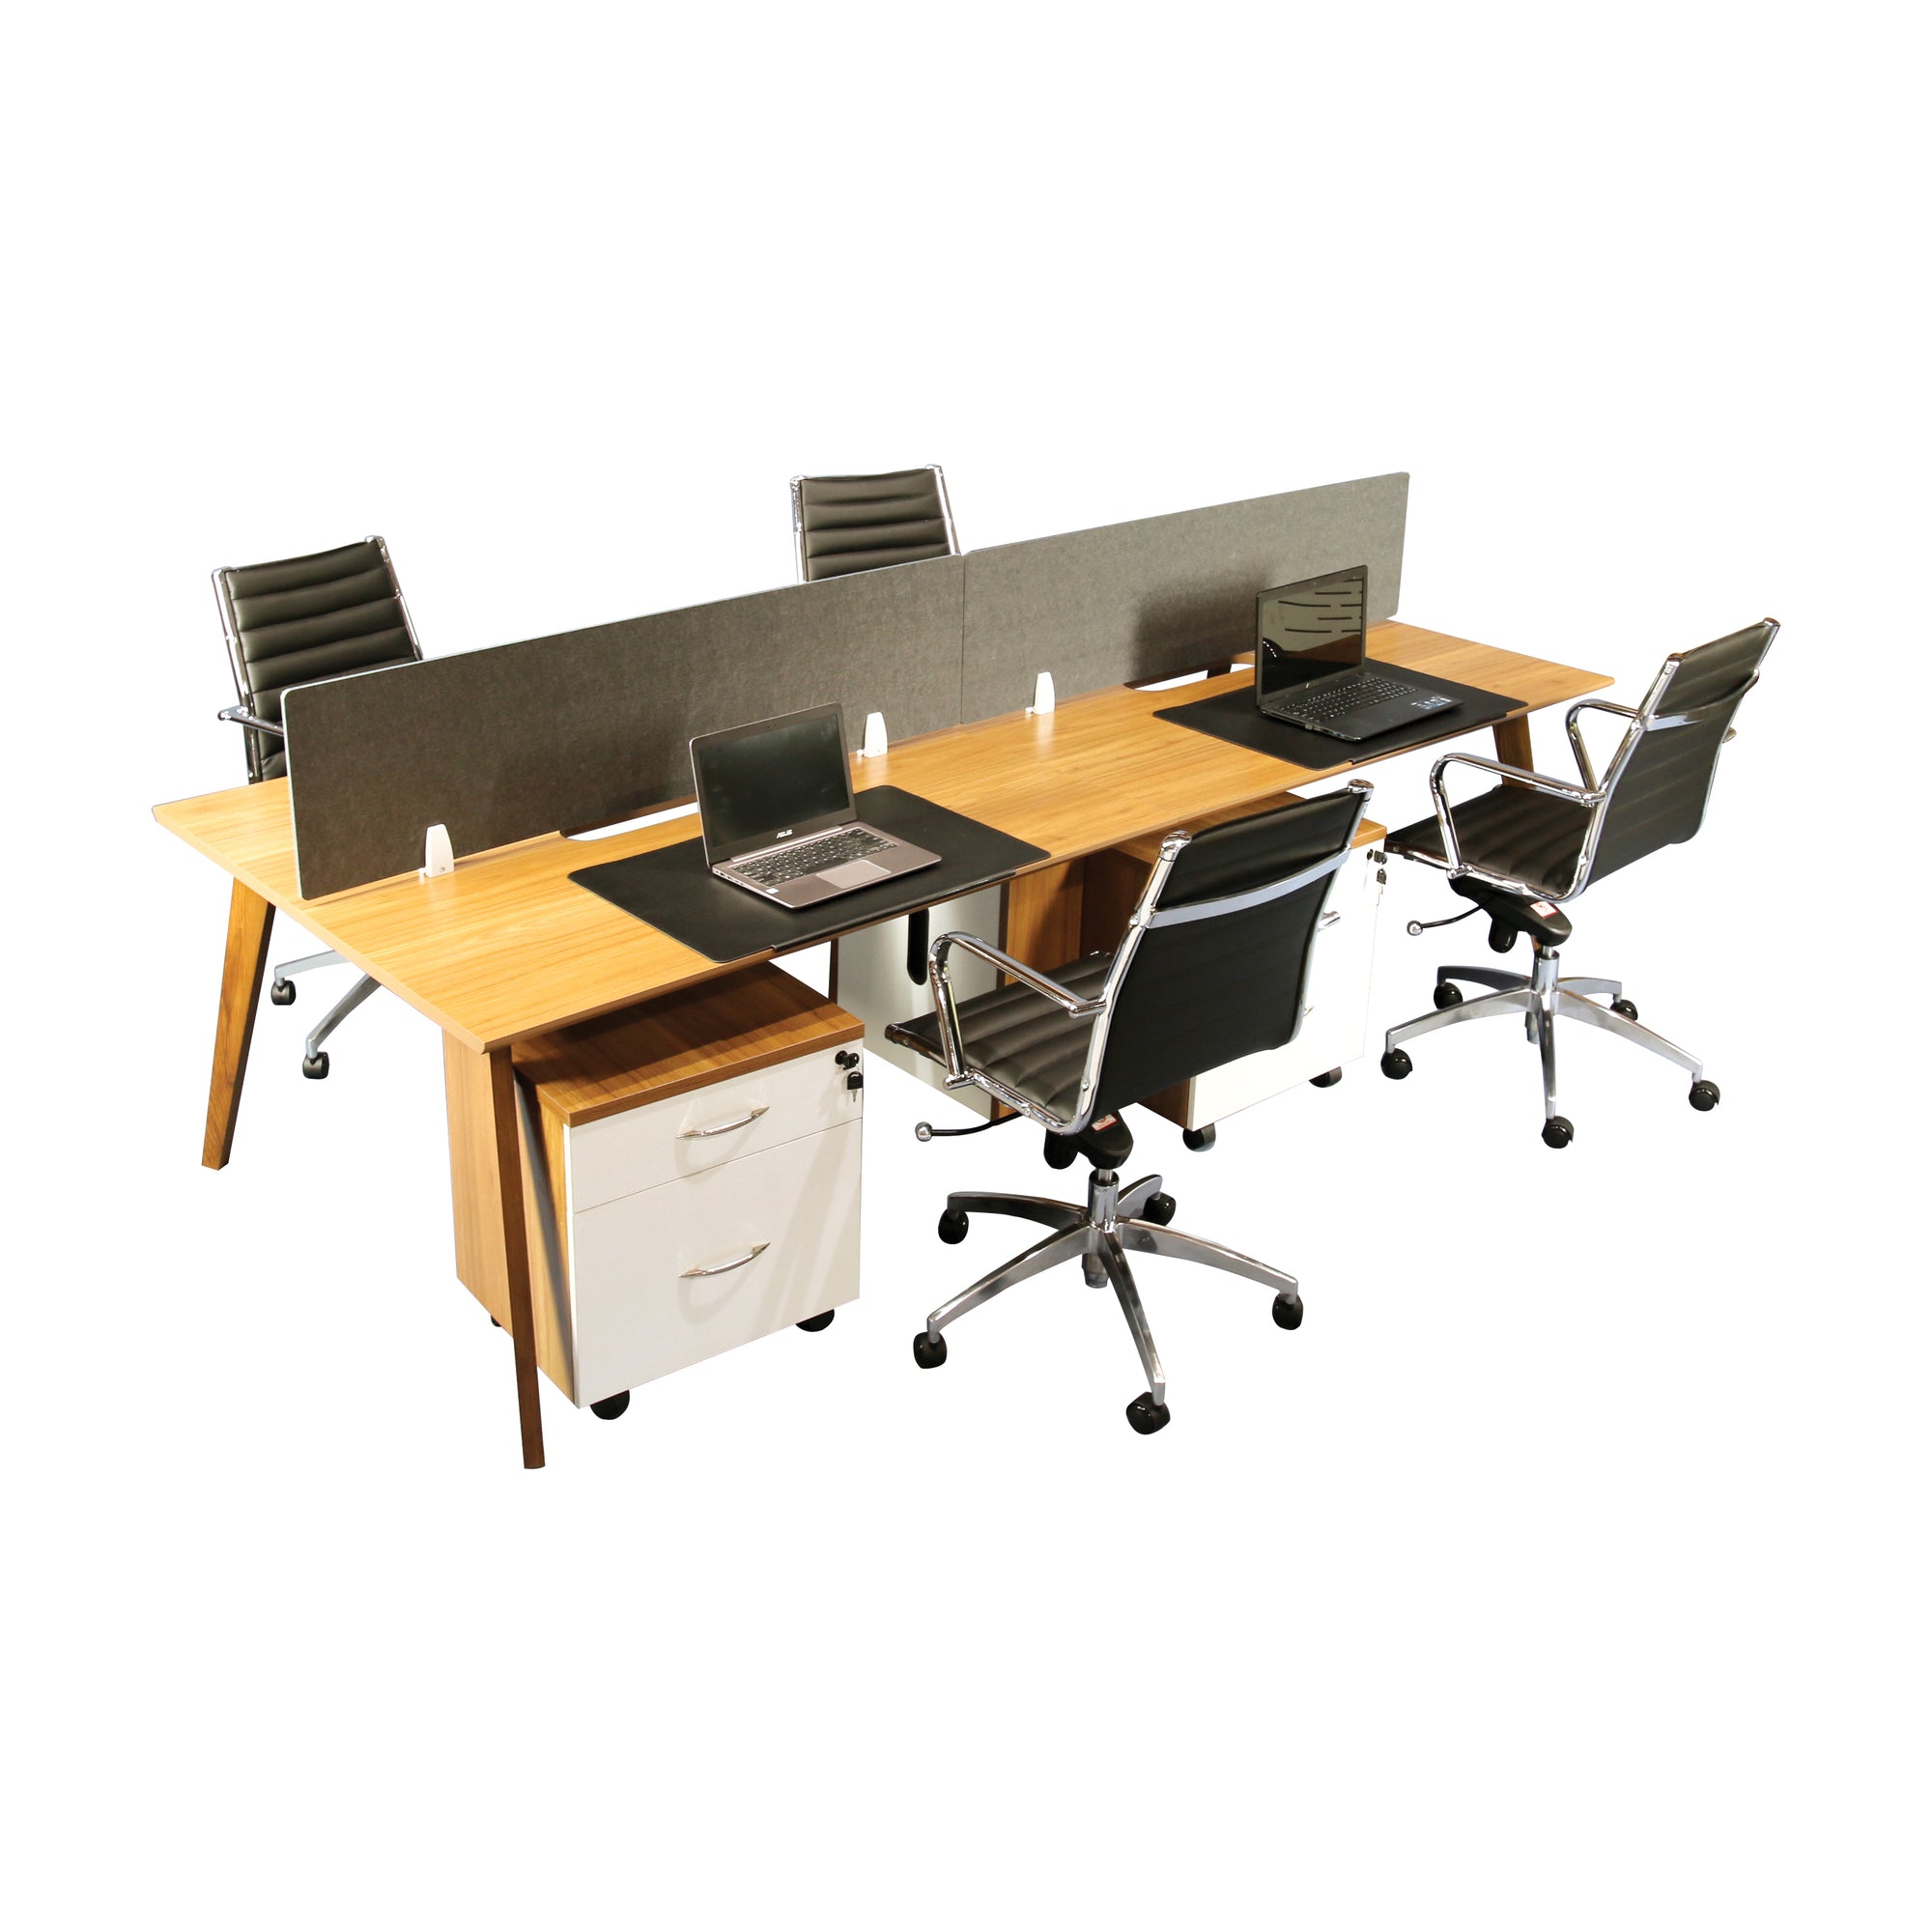 Arbor 4 Person WorkStation American Walnut with Solid Timber Legs